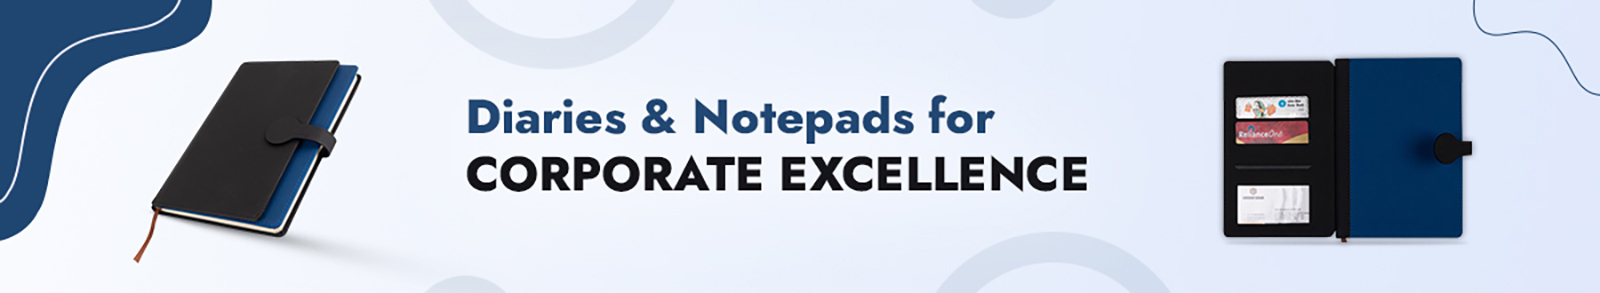 Diaries & Notepads for Corporate Excellence